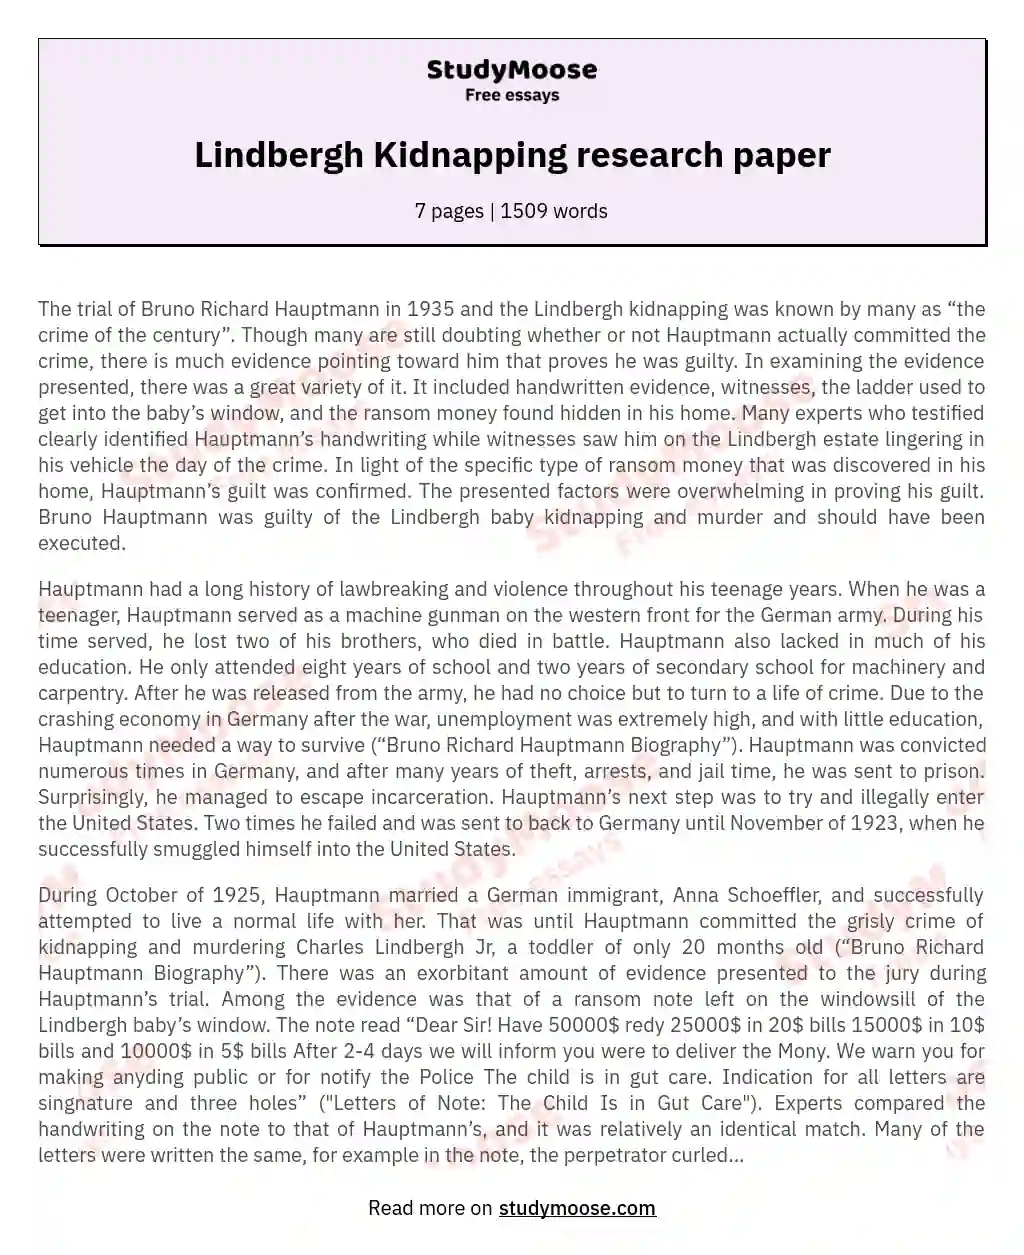 research paper for kidnapping